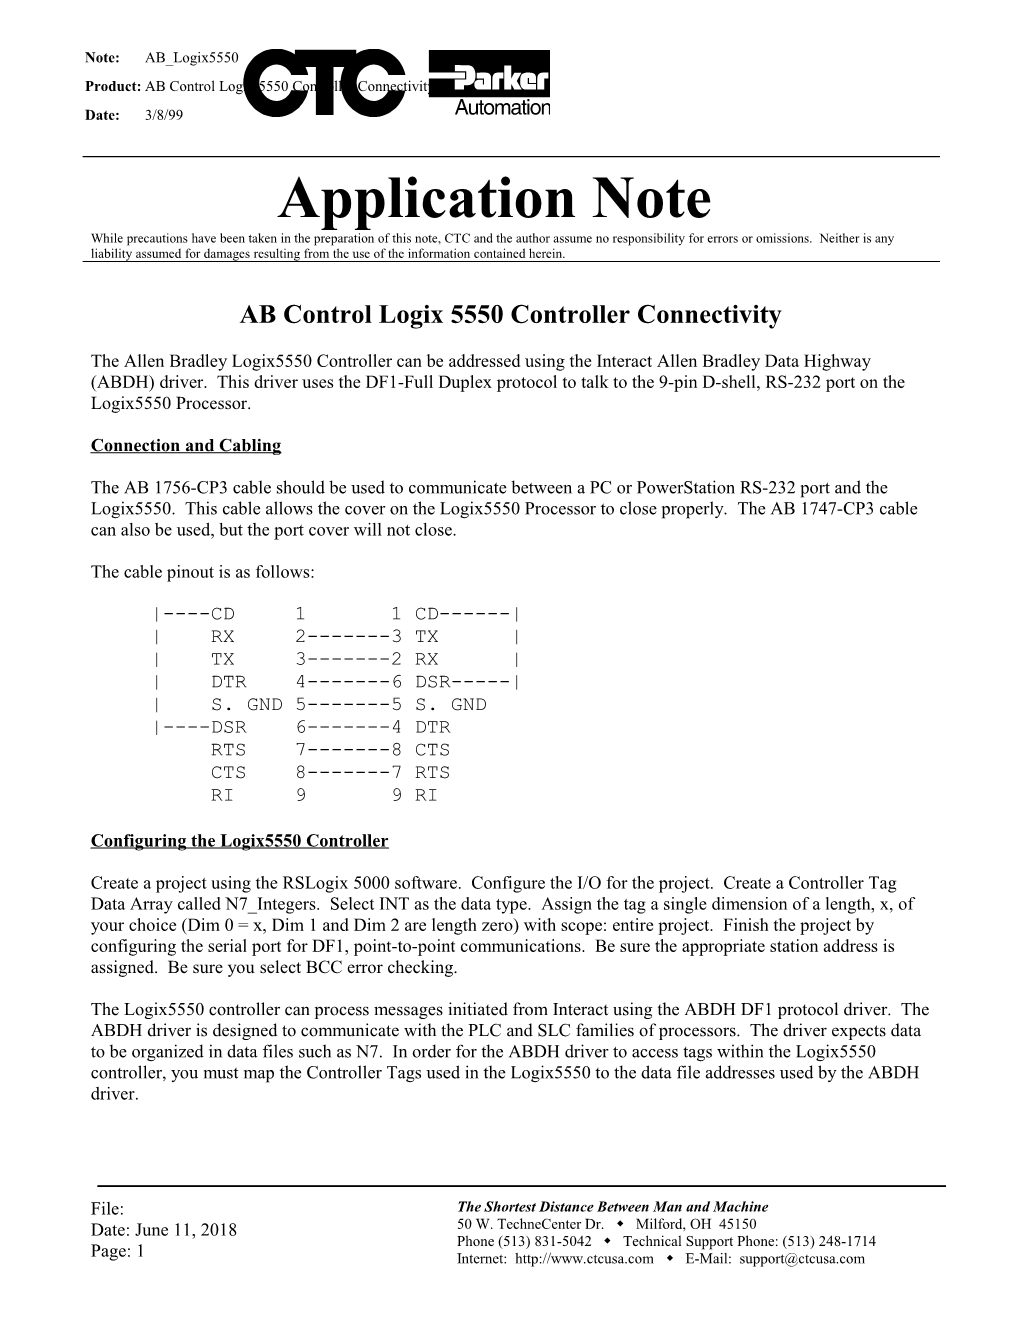 Product:AB Control Logix 5550 Controller Connectivity